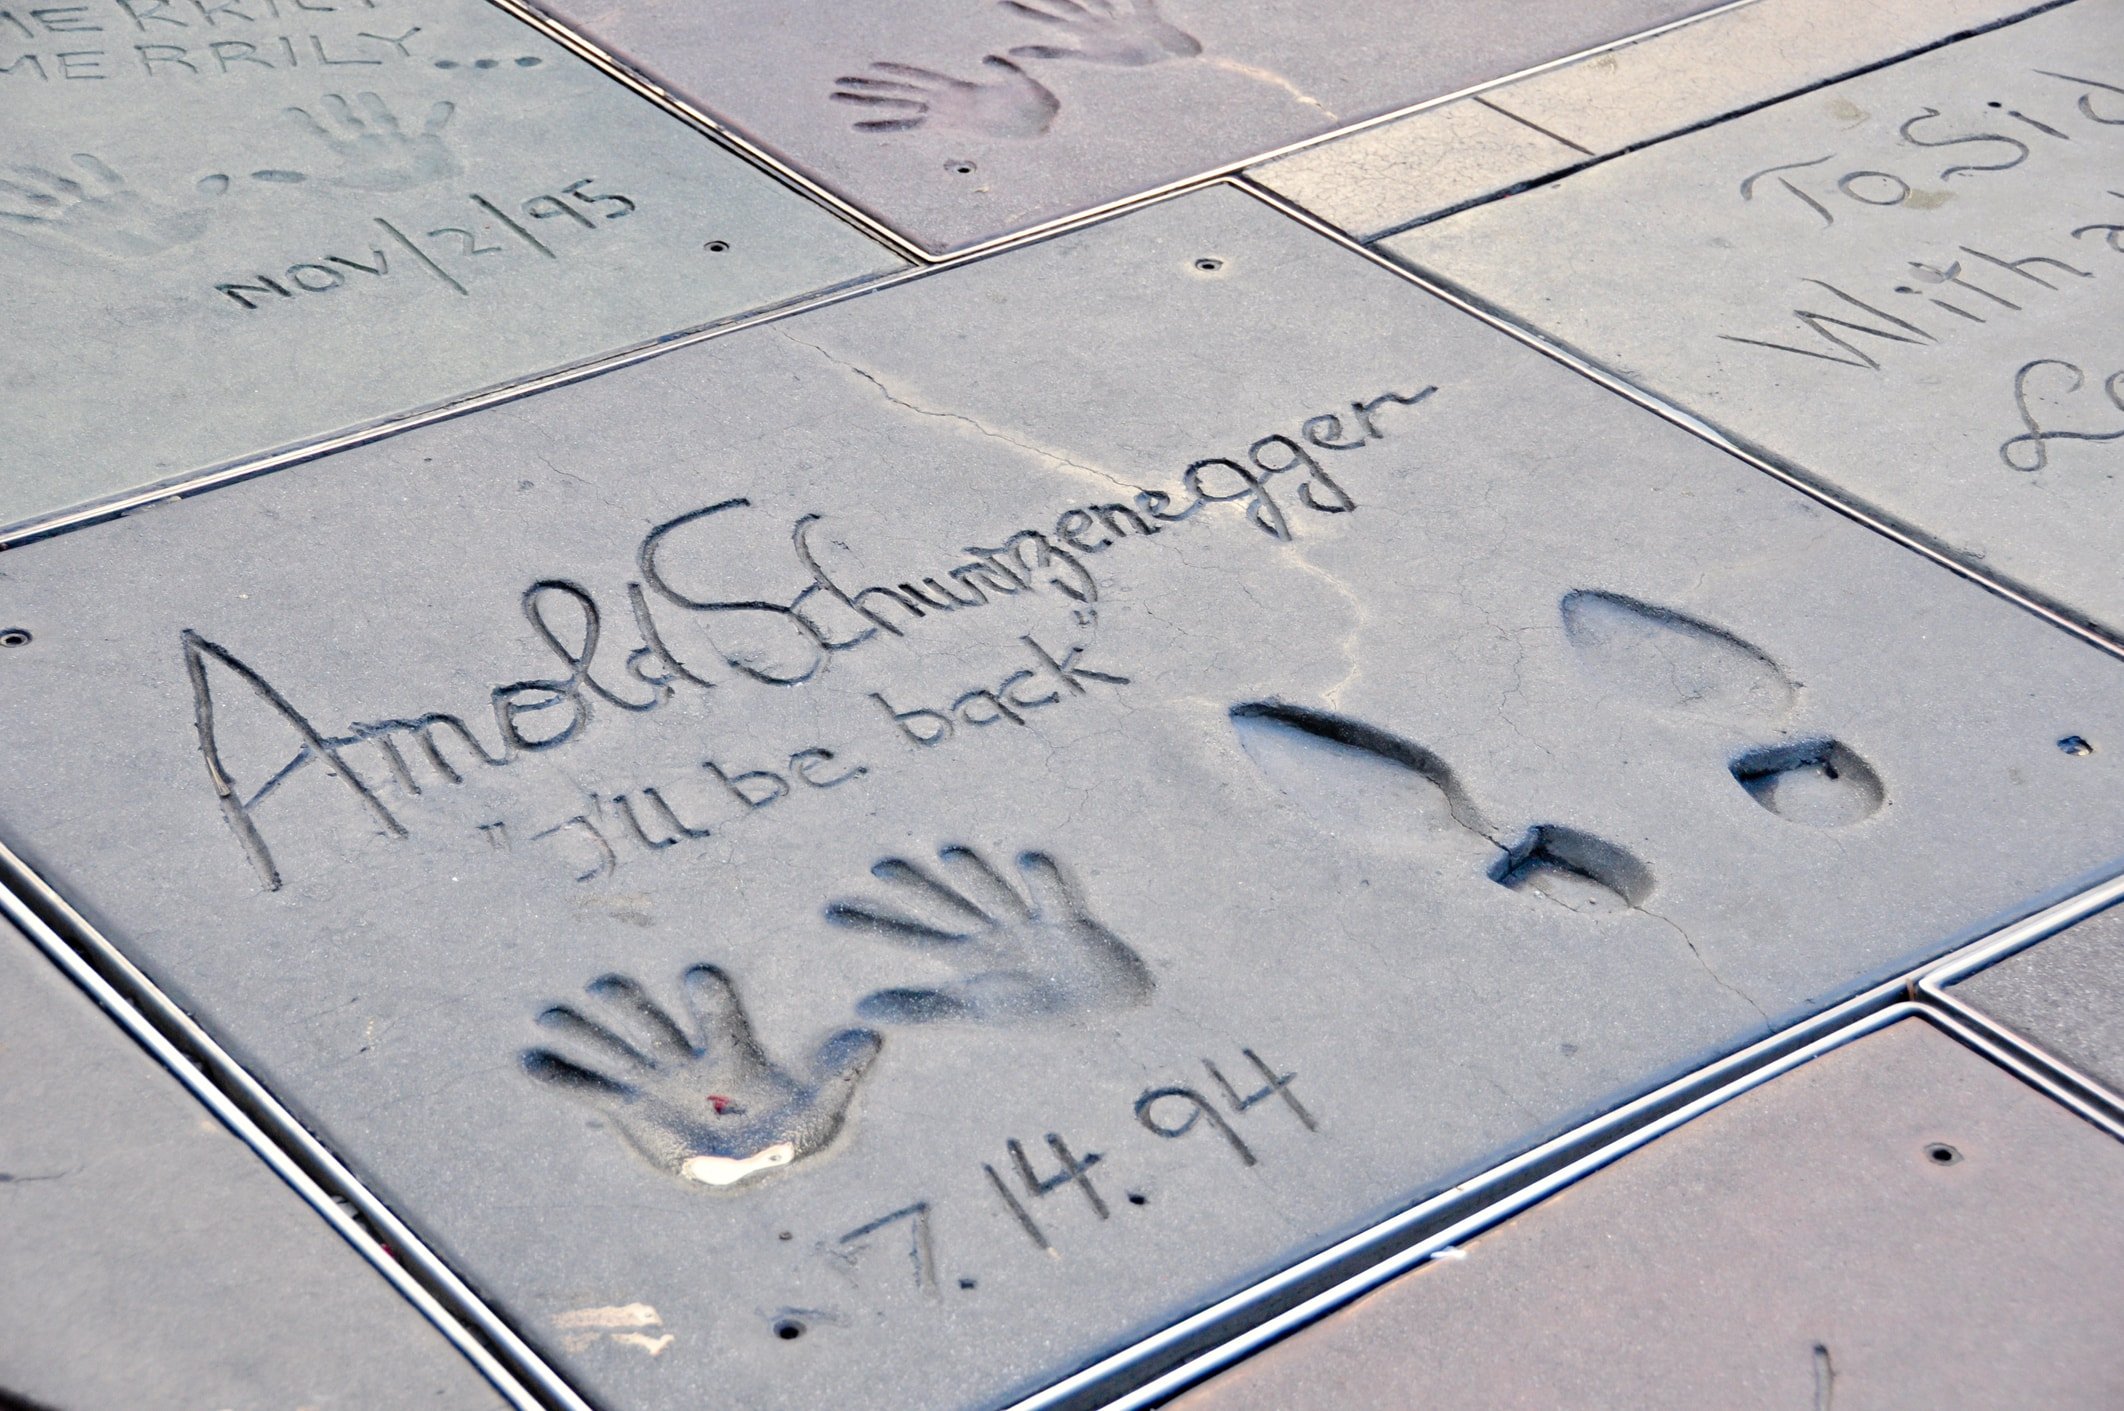 Arnold Schwarzenegger's Hand Print at Mann's Chinese Theater. The Shoe prints and handprints in concrete and dated 7.14.94.